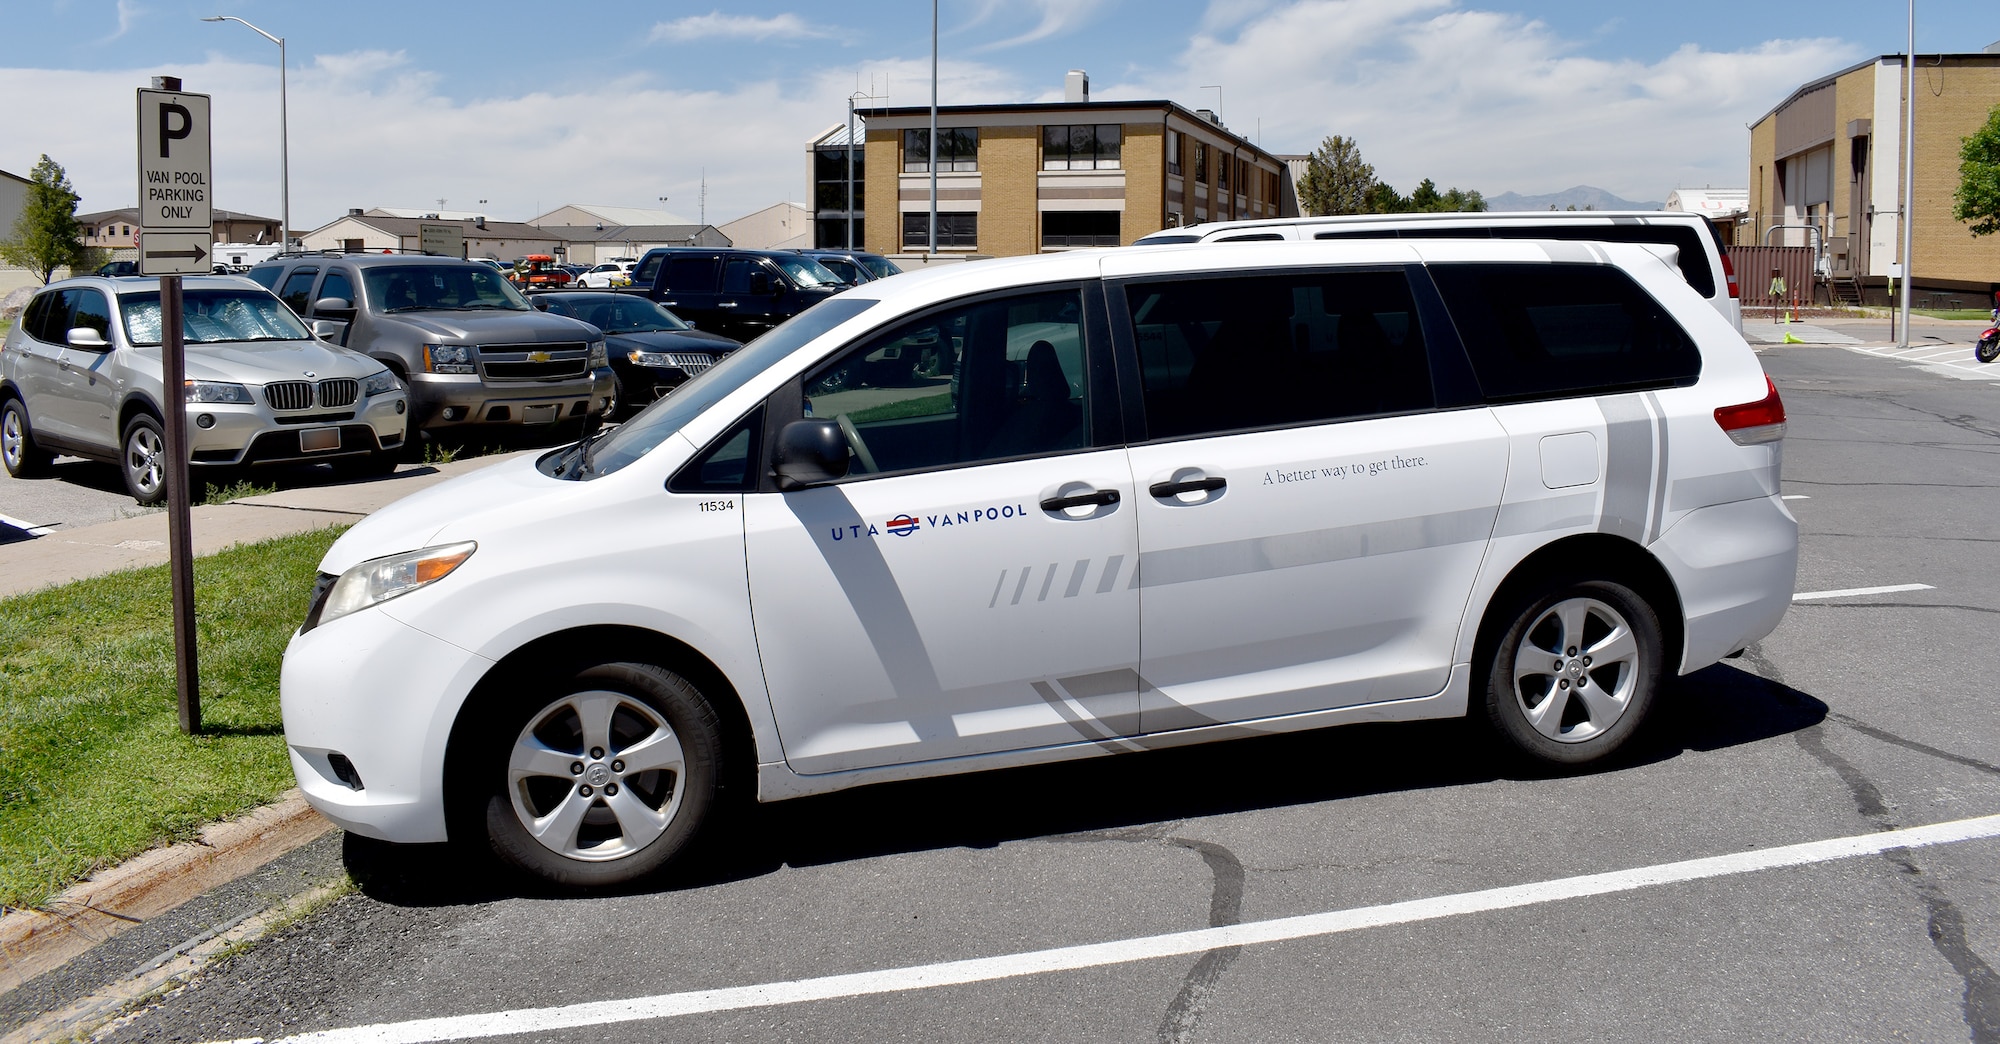 A Utah Transit Authority vanpool vehicle parked near building 100 at Hill Air Force Base, Utah, July 16, 2019. Hill AFB employees are saving money with the base public transit commuter program. The program, officially called the Transportation Incentive Program, has about 650 participants and more than 160 Utah Transit Authority vans that run on base.Vans have various pick up and drop off locations, including FrontRunner stations close to the base. (U.S. Air Force photo) (This photo has been altered by blurring out license plates.)